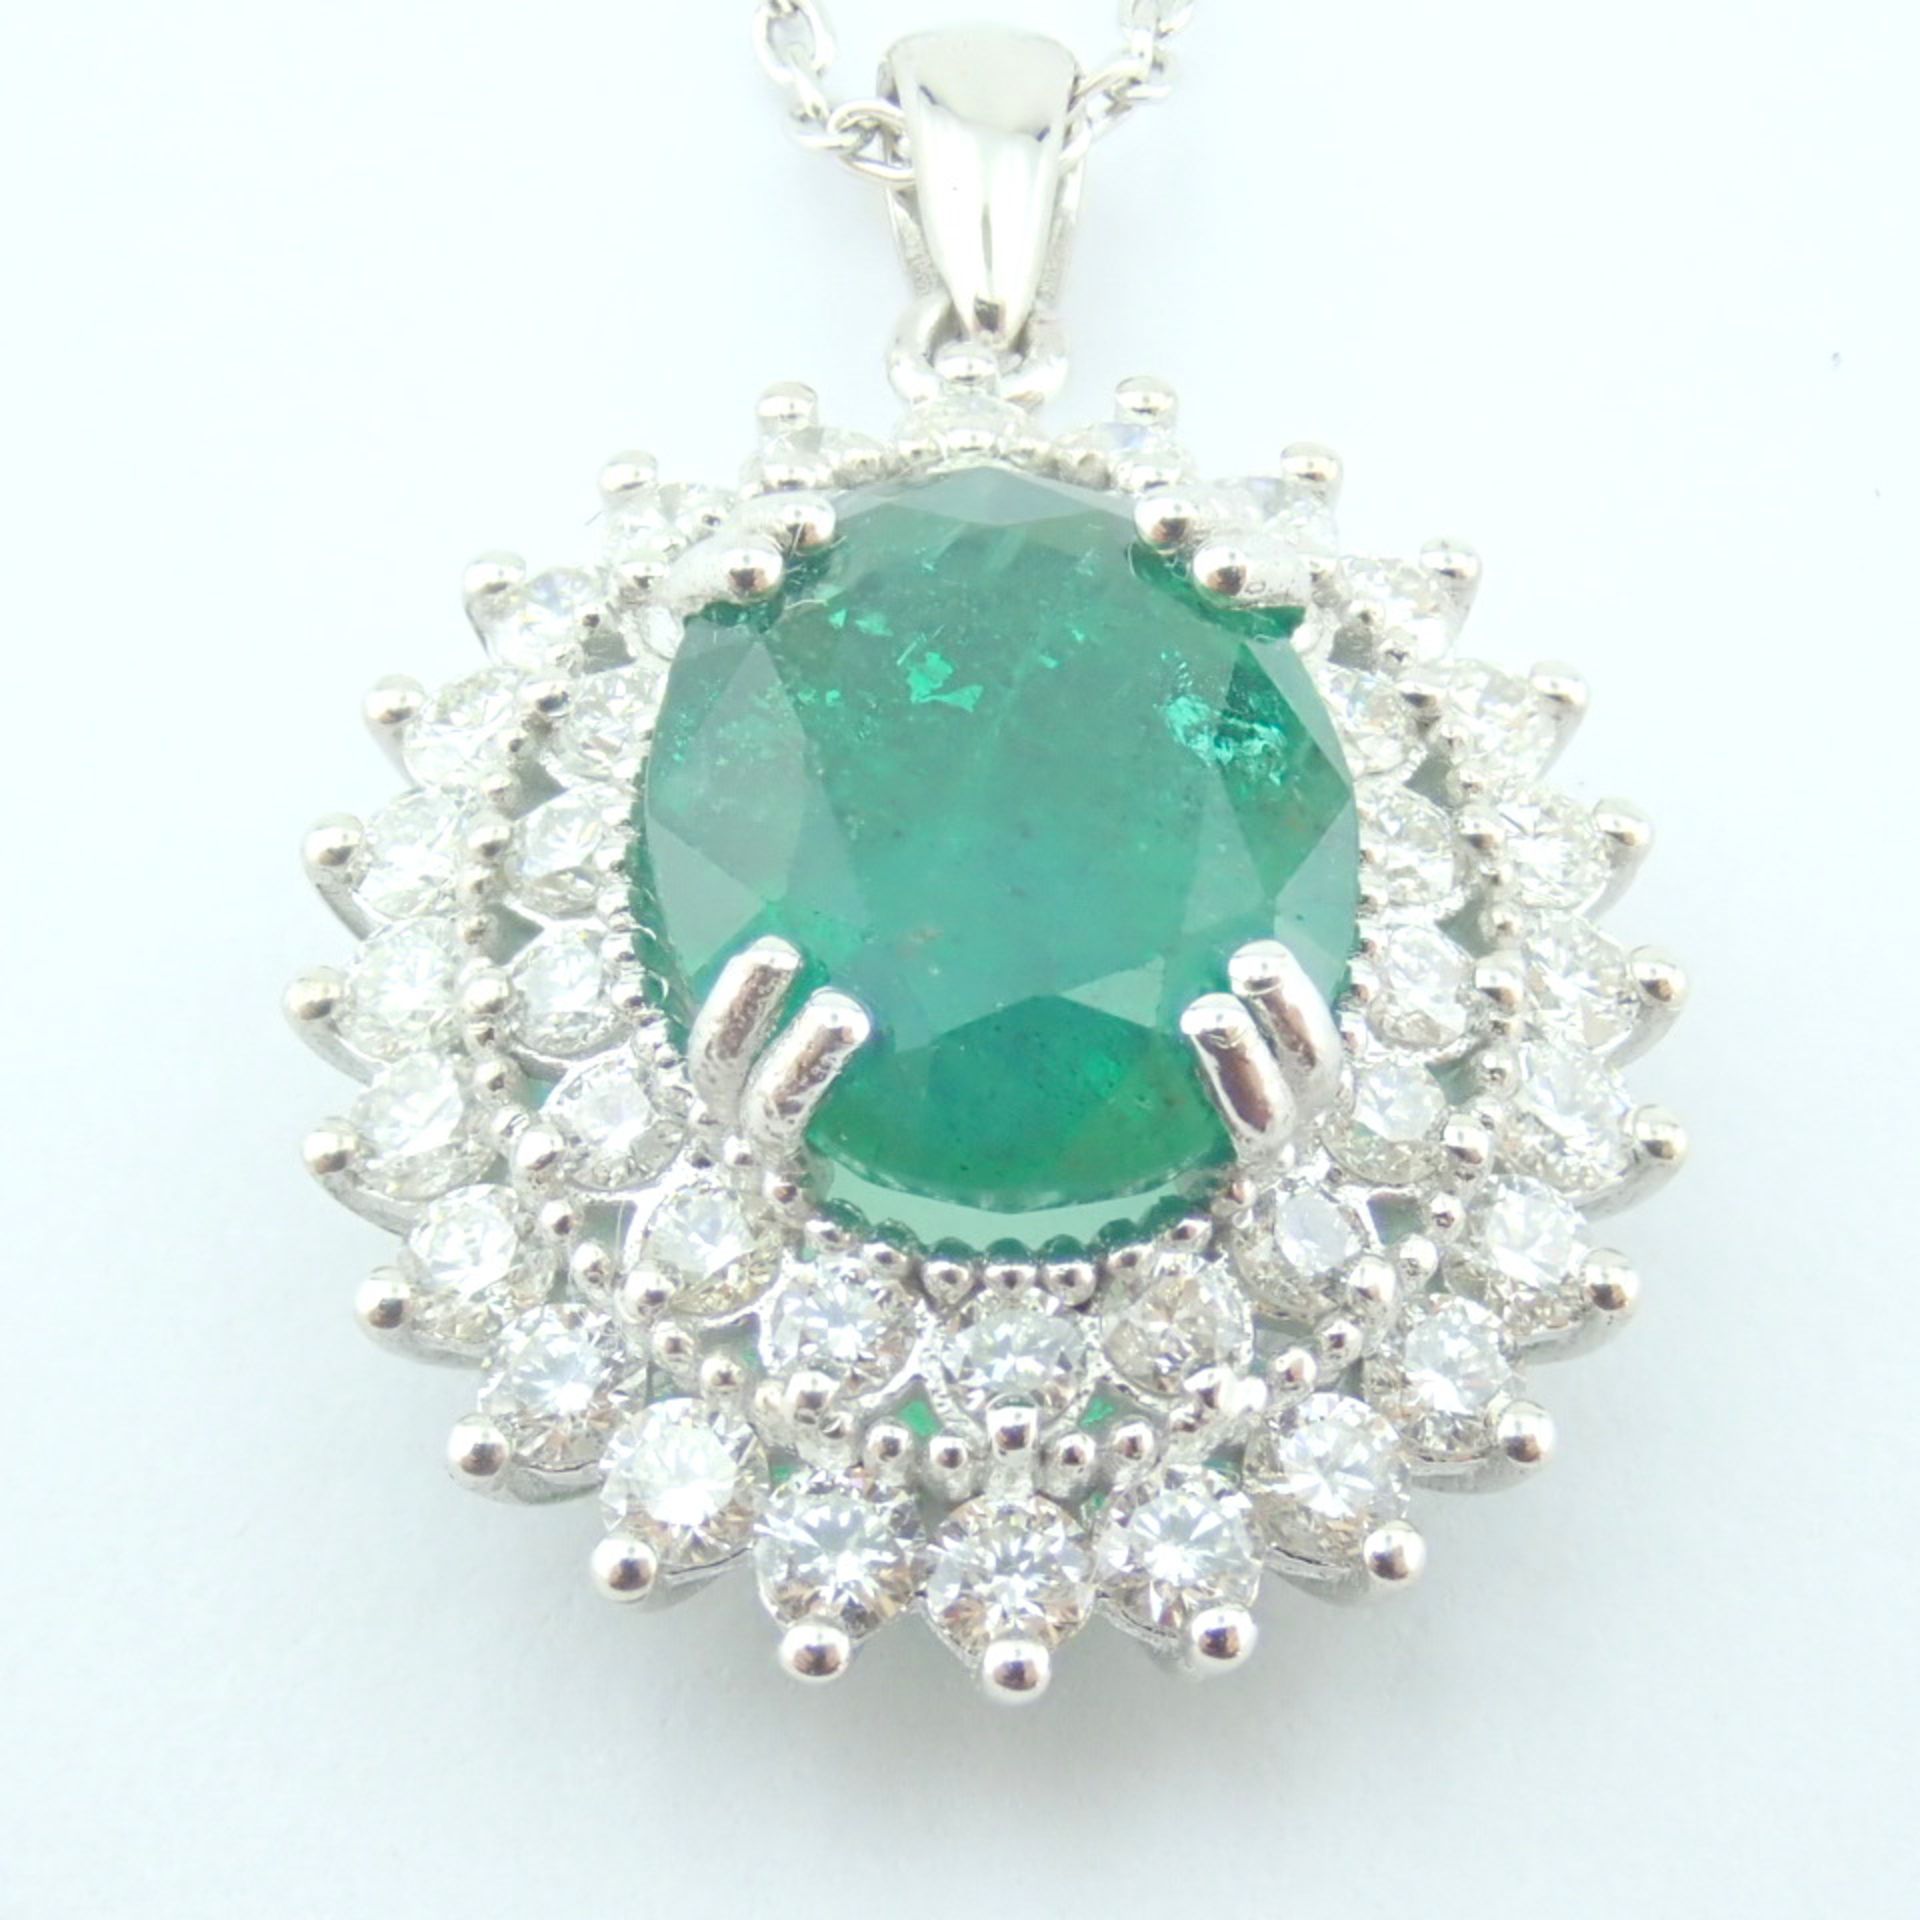 Certificated 14K White Gold Diamond & Emerald Necklace - Image 5 of 11